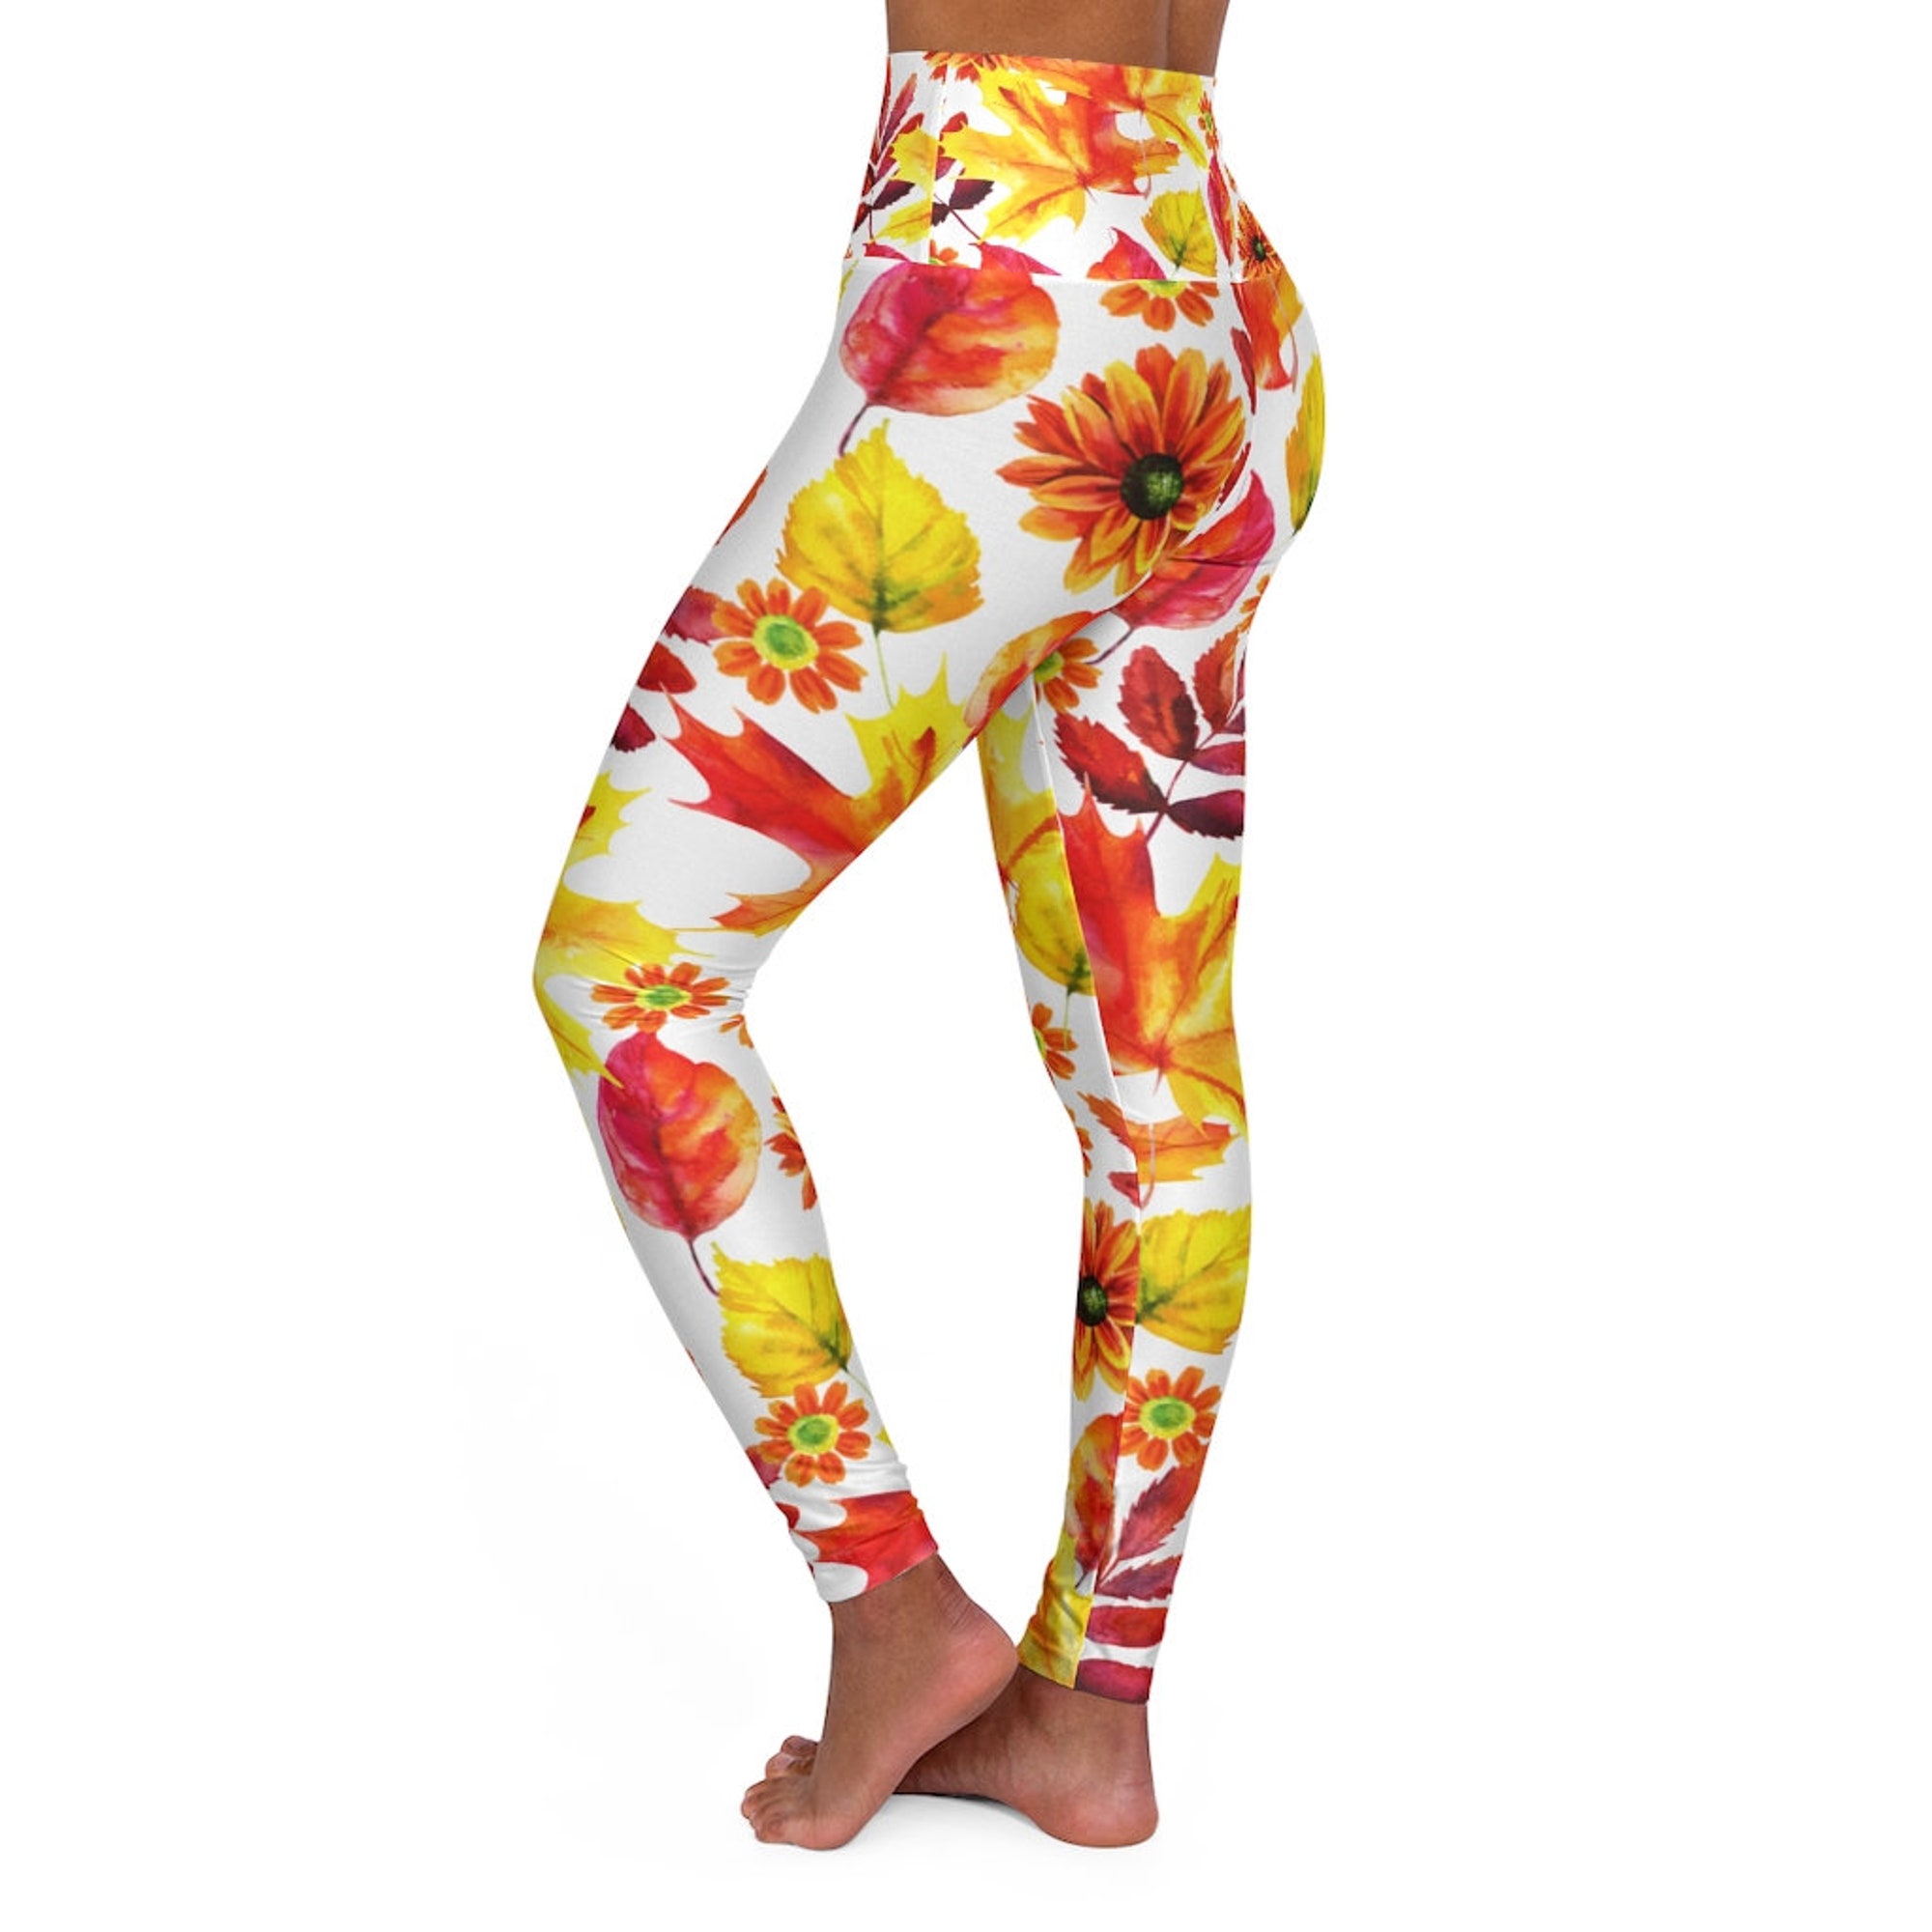 Discover High Waisted Yoga Leggings on Autumn Leaves pattern